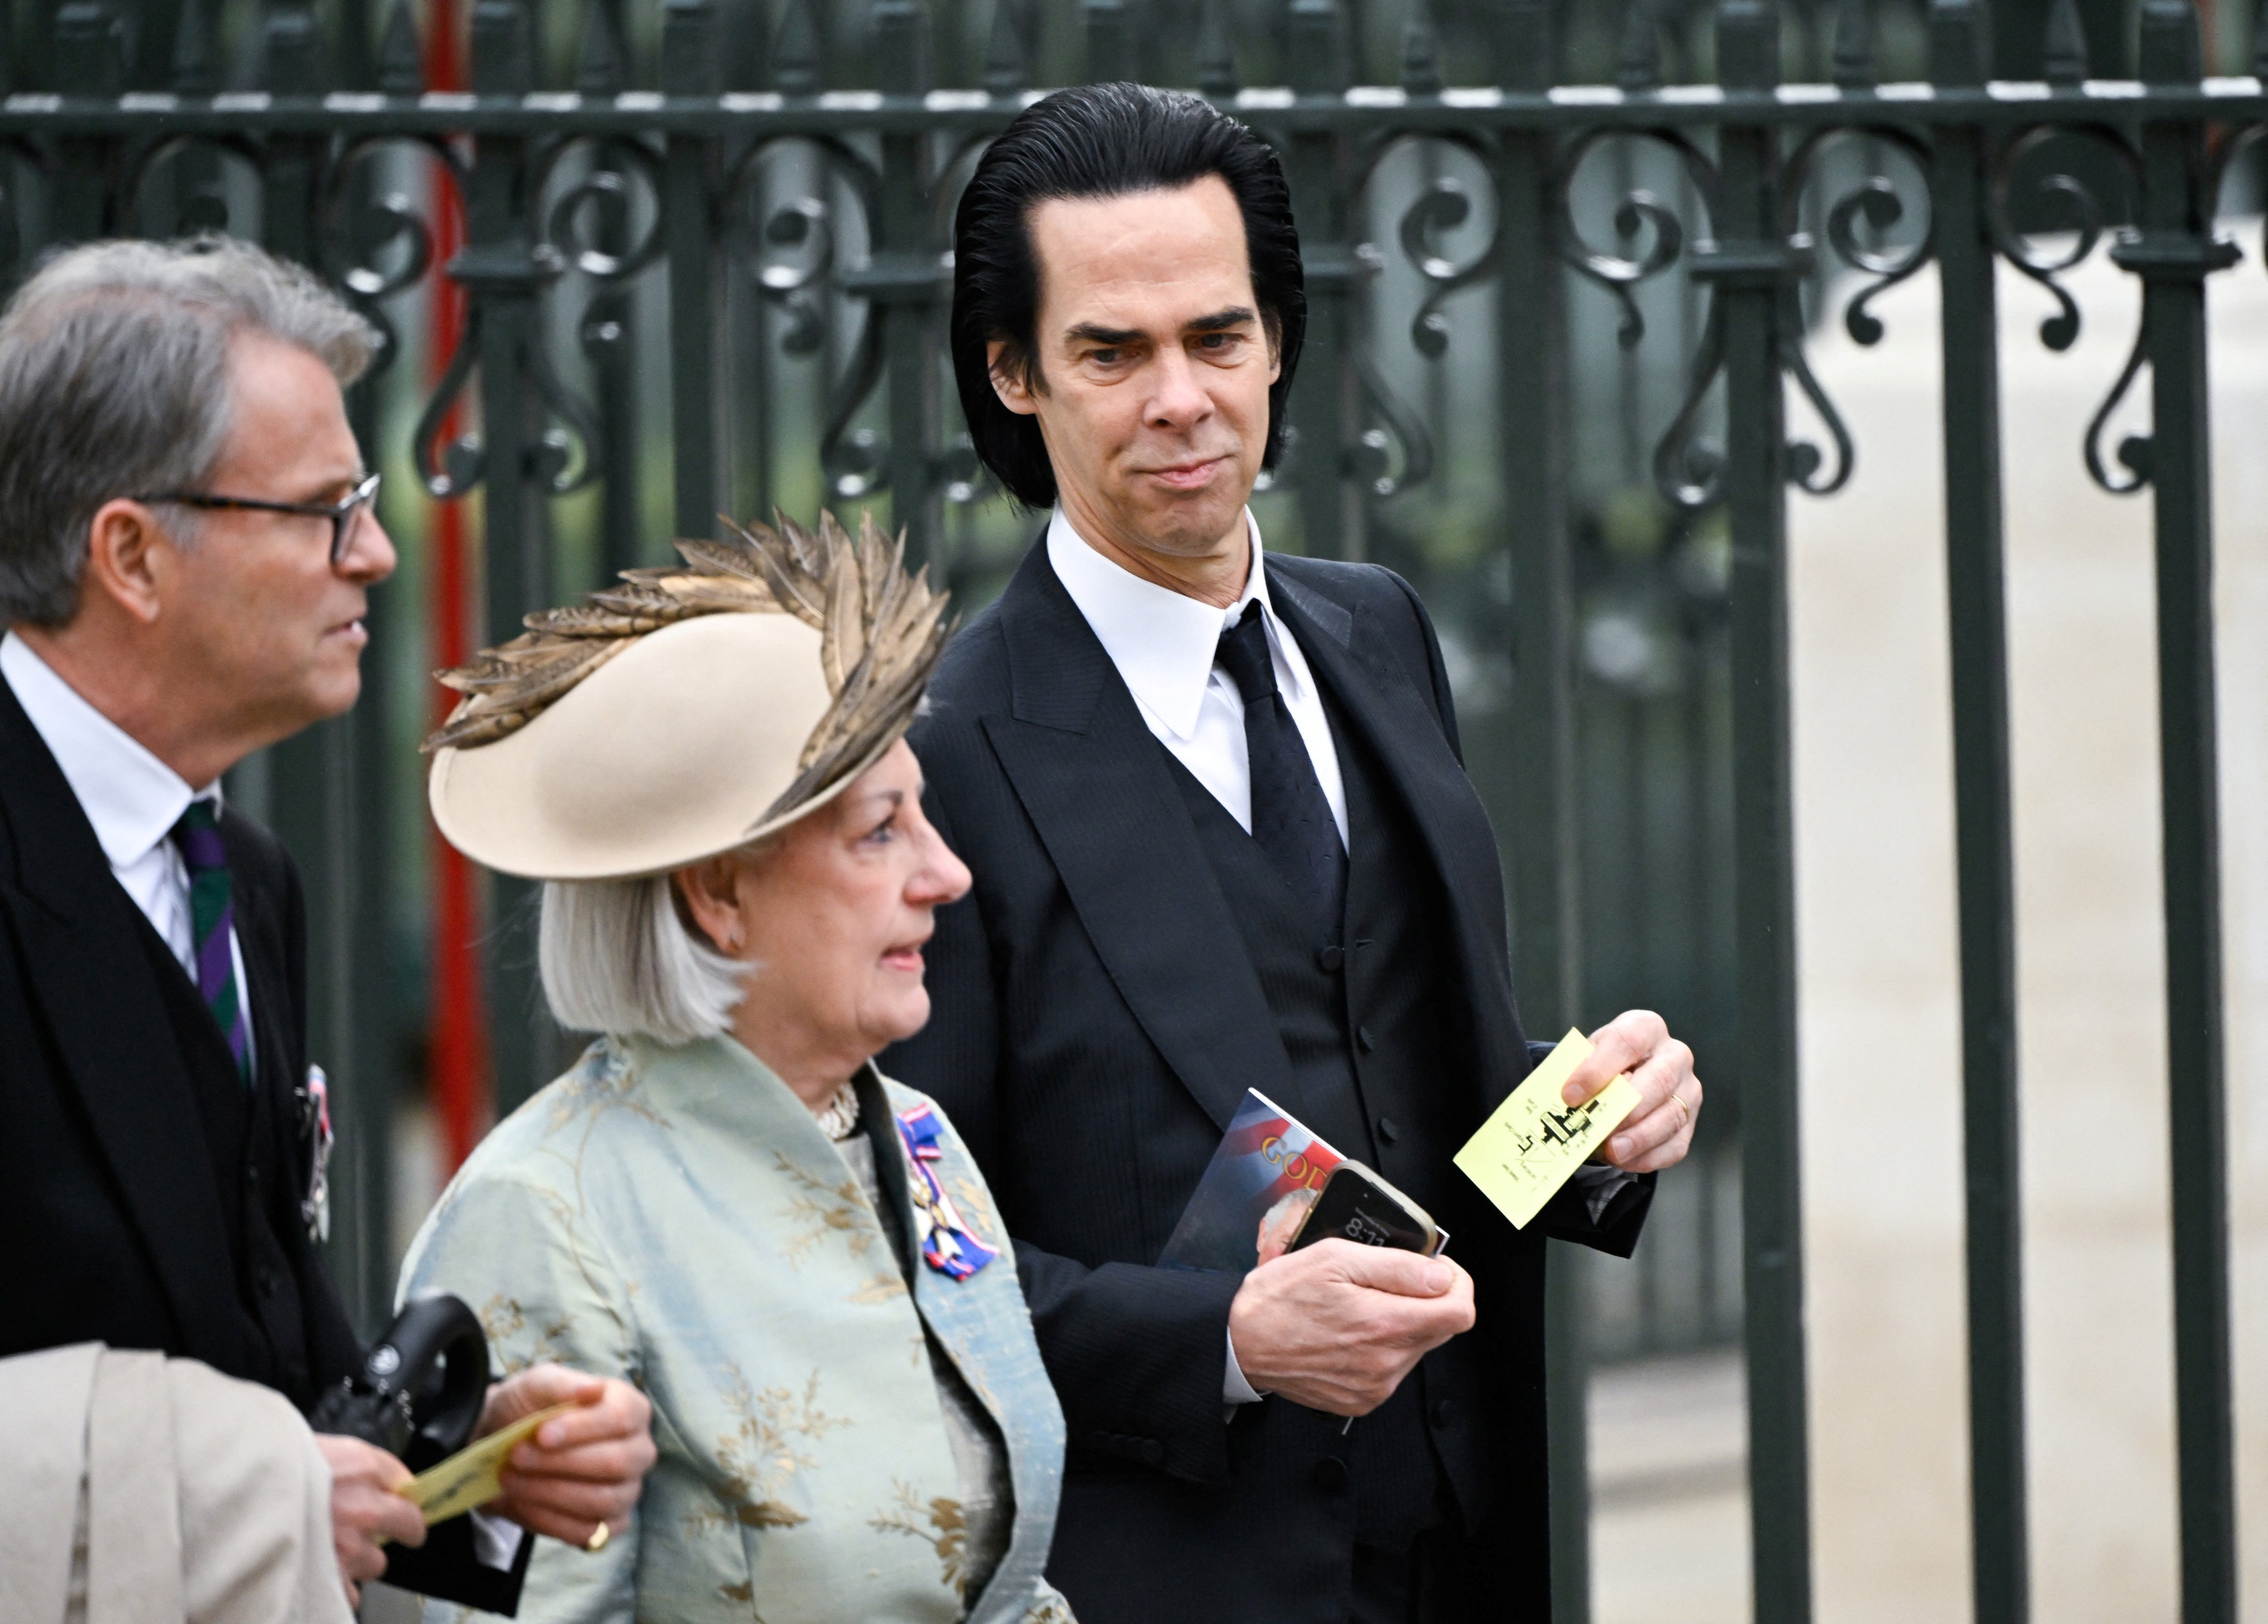 Pitchfork on Twitter: "Nick Cave, seen here at the coronation of King Charles III, has an "inexplicable emotional attachment to the Royals” https://t.co/J2AXOtYP4p https://t.co/67nNVjNdQB" / Twitter